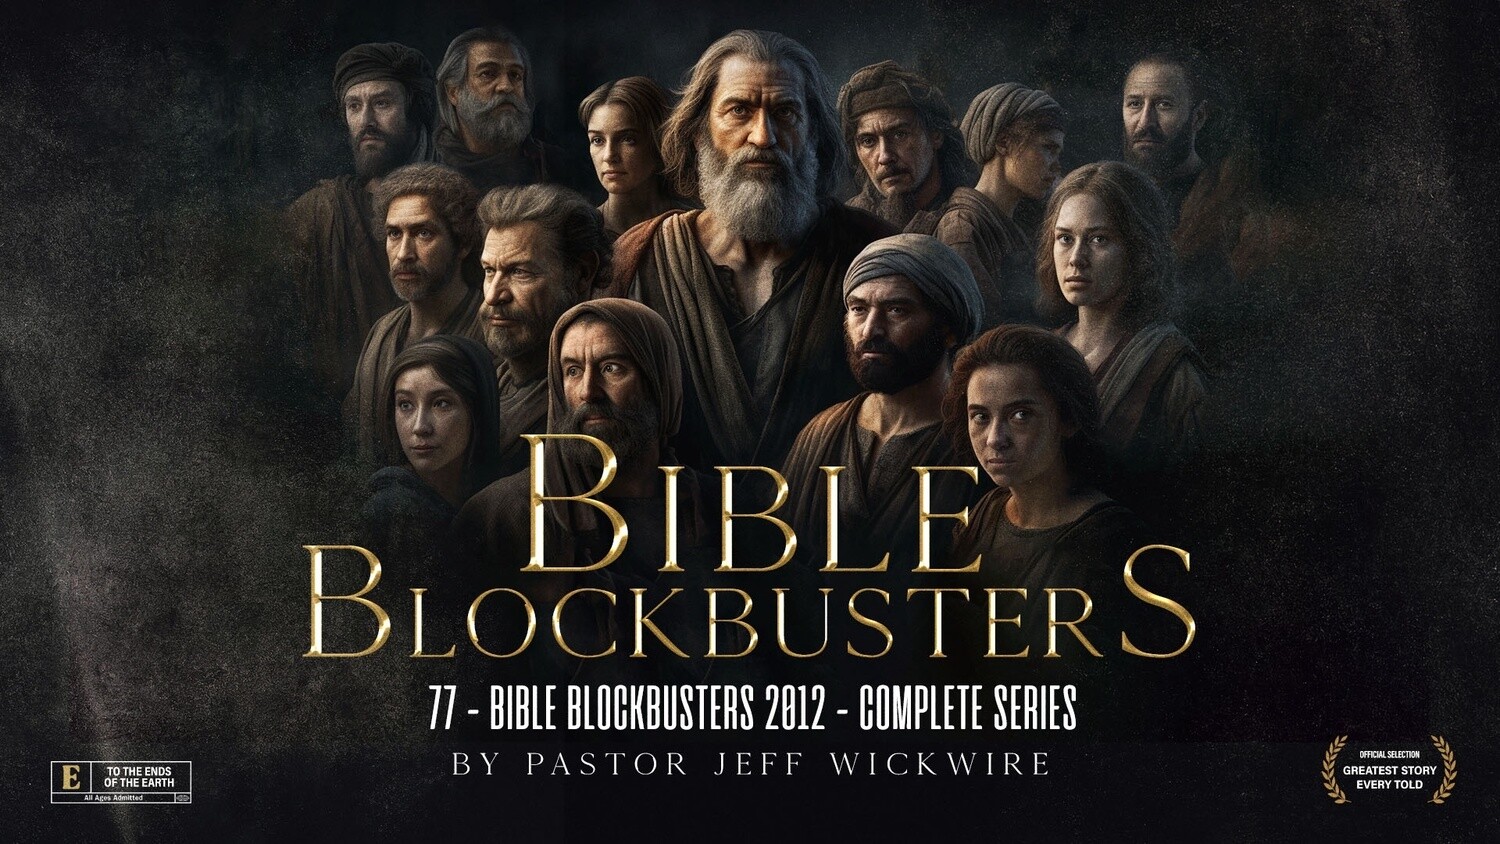 77 - Bible Blockbusters 2012 - Complete Series By Pastor Jeff Wickwire